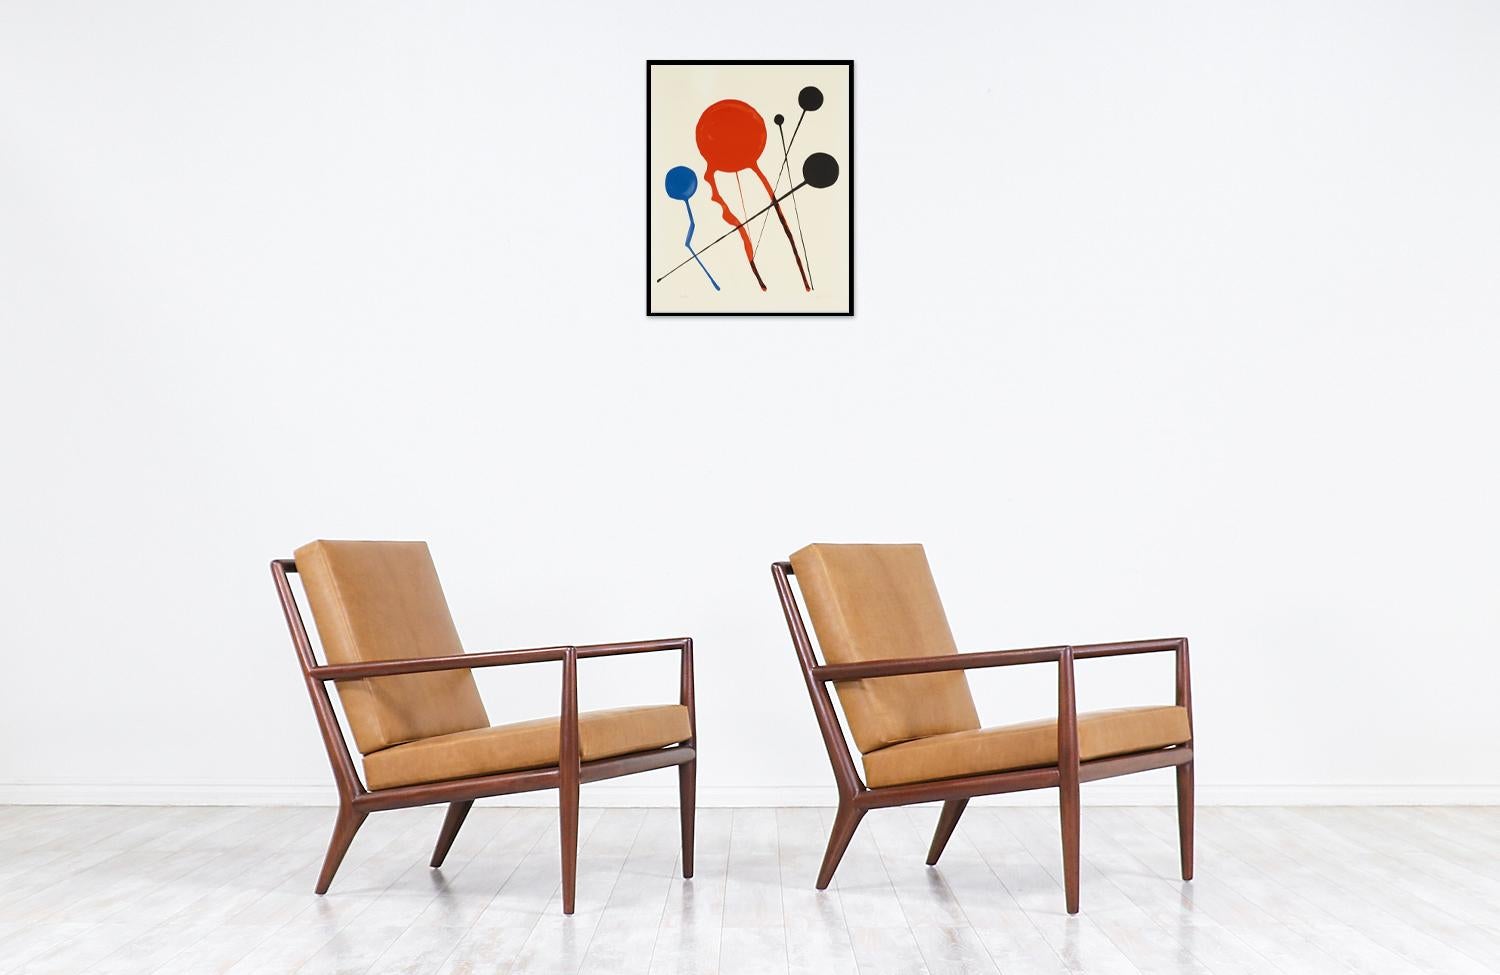 Elegant modern lounge chairs designed by T.H. Robsjohn-Gibbings in collaboration with the famous Widdicomb Furniture company in the United States during the 1950s. These midcentury ergonomic lounge chairs feature a solid walnut wood frame with